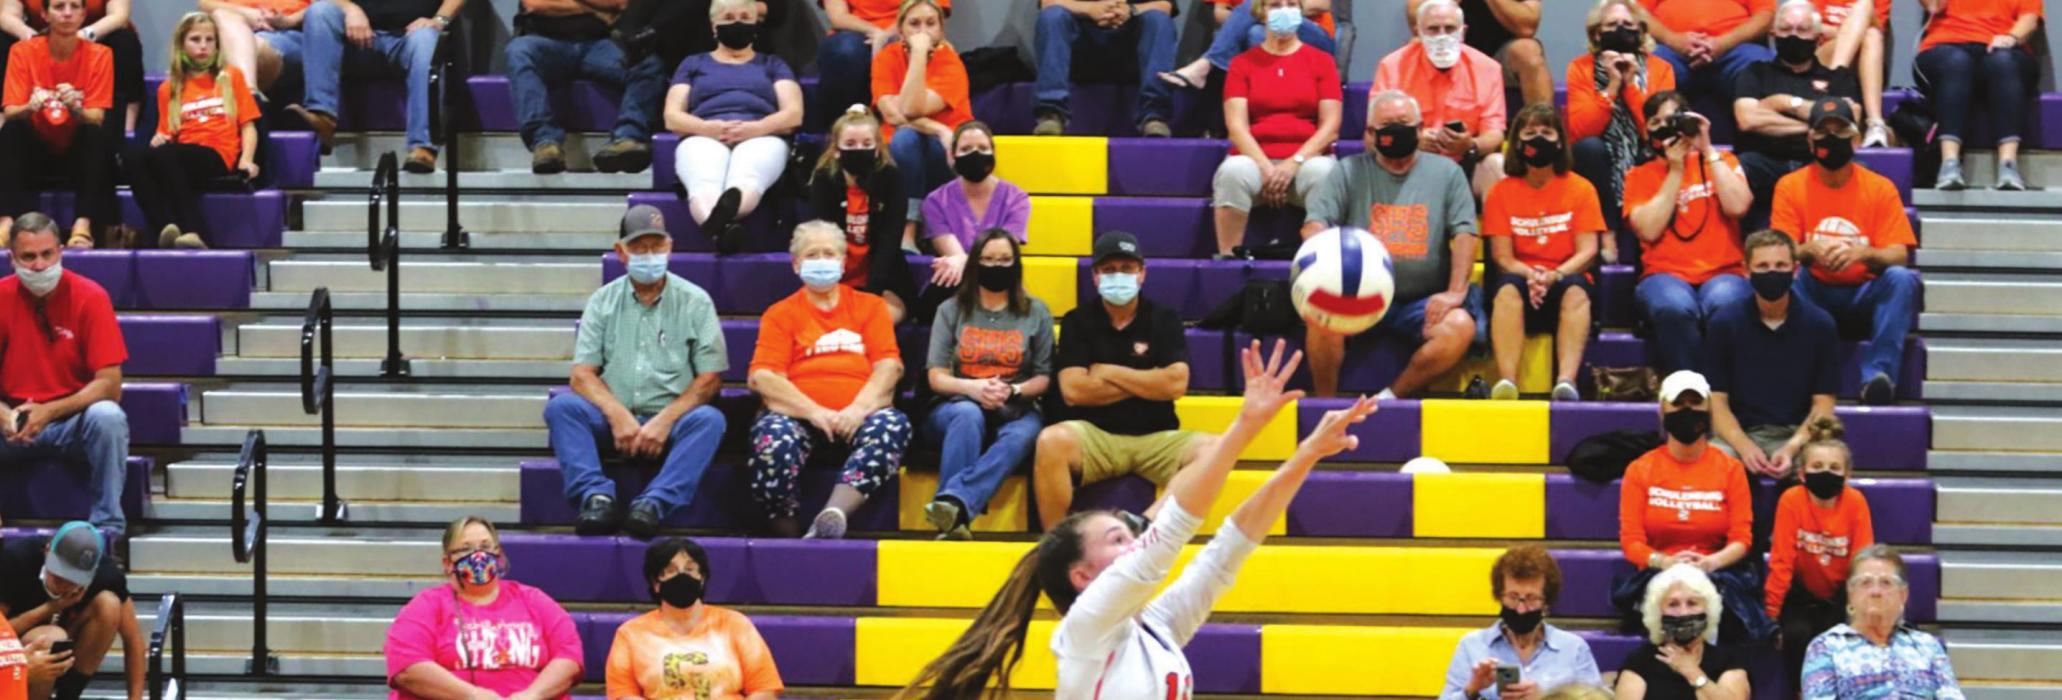 Masks, face shields, etc. were out in full force in the crowd Tuesday as Schulenburg fans watched their team play Weimar in volleyball. Photo by Audrey Kristynik